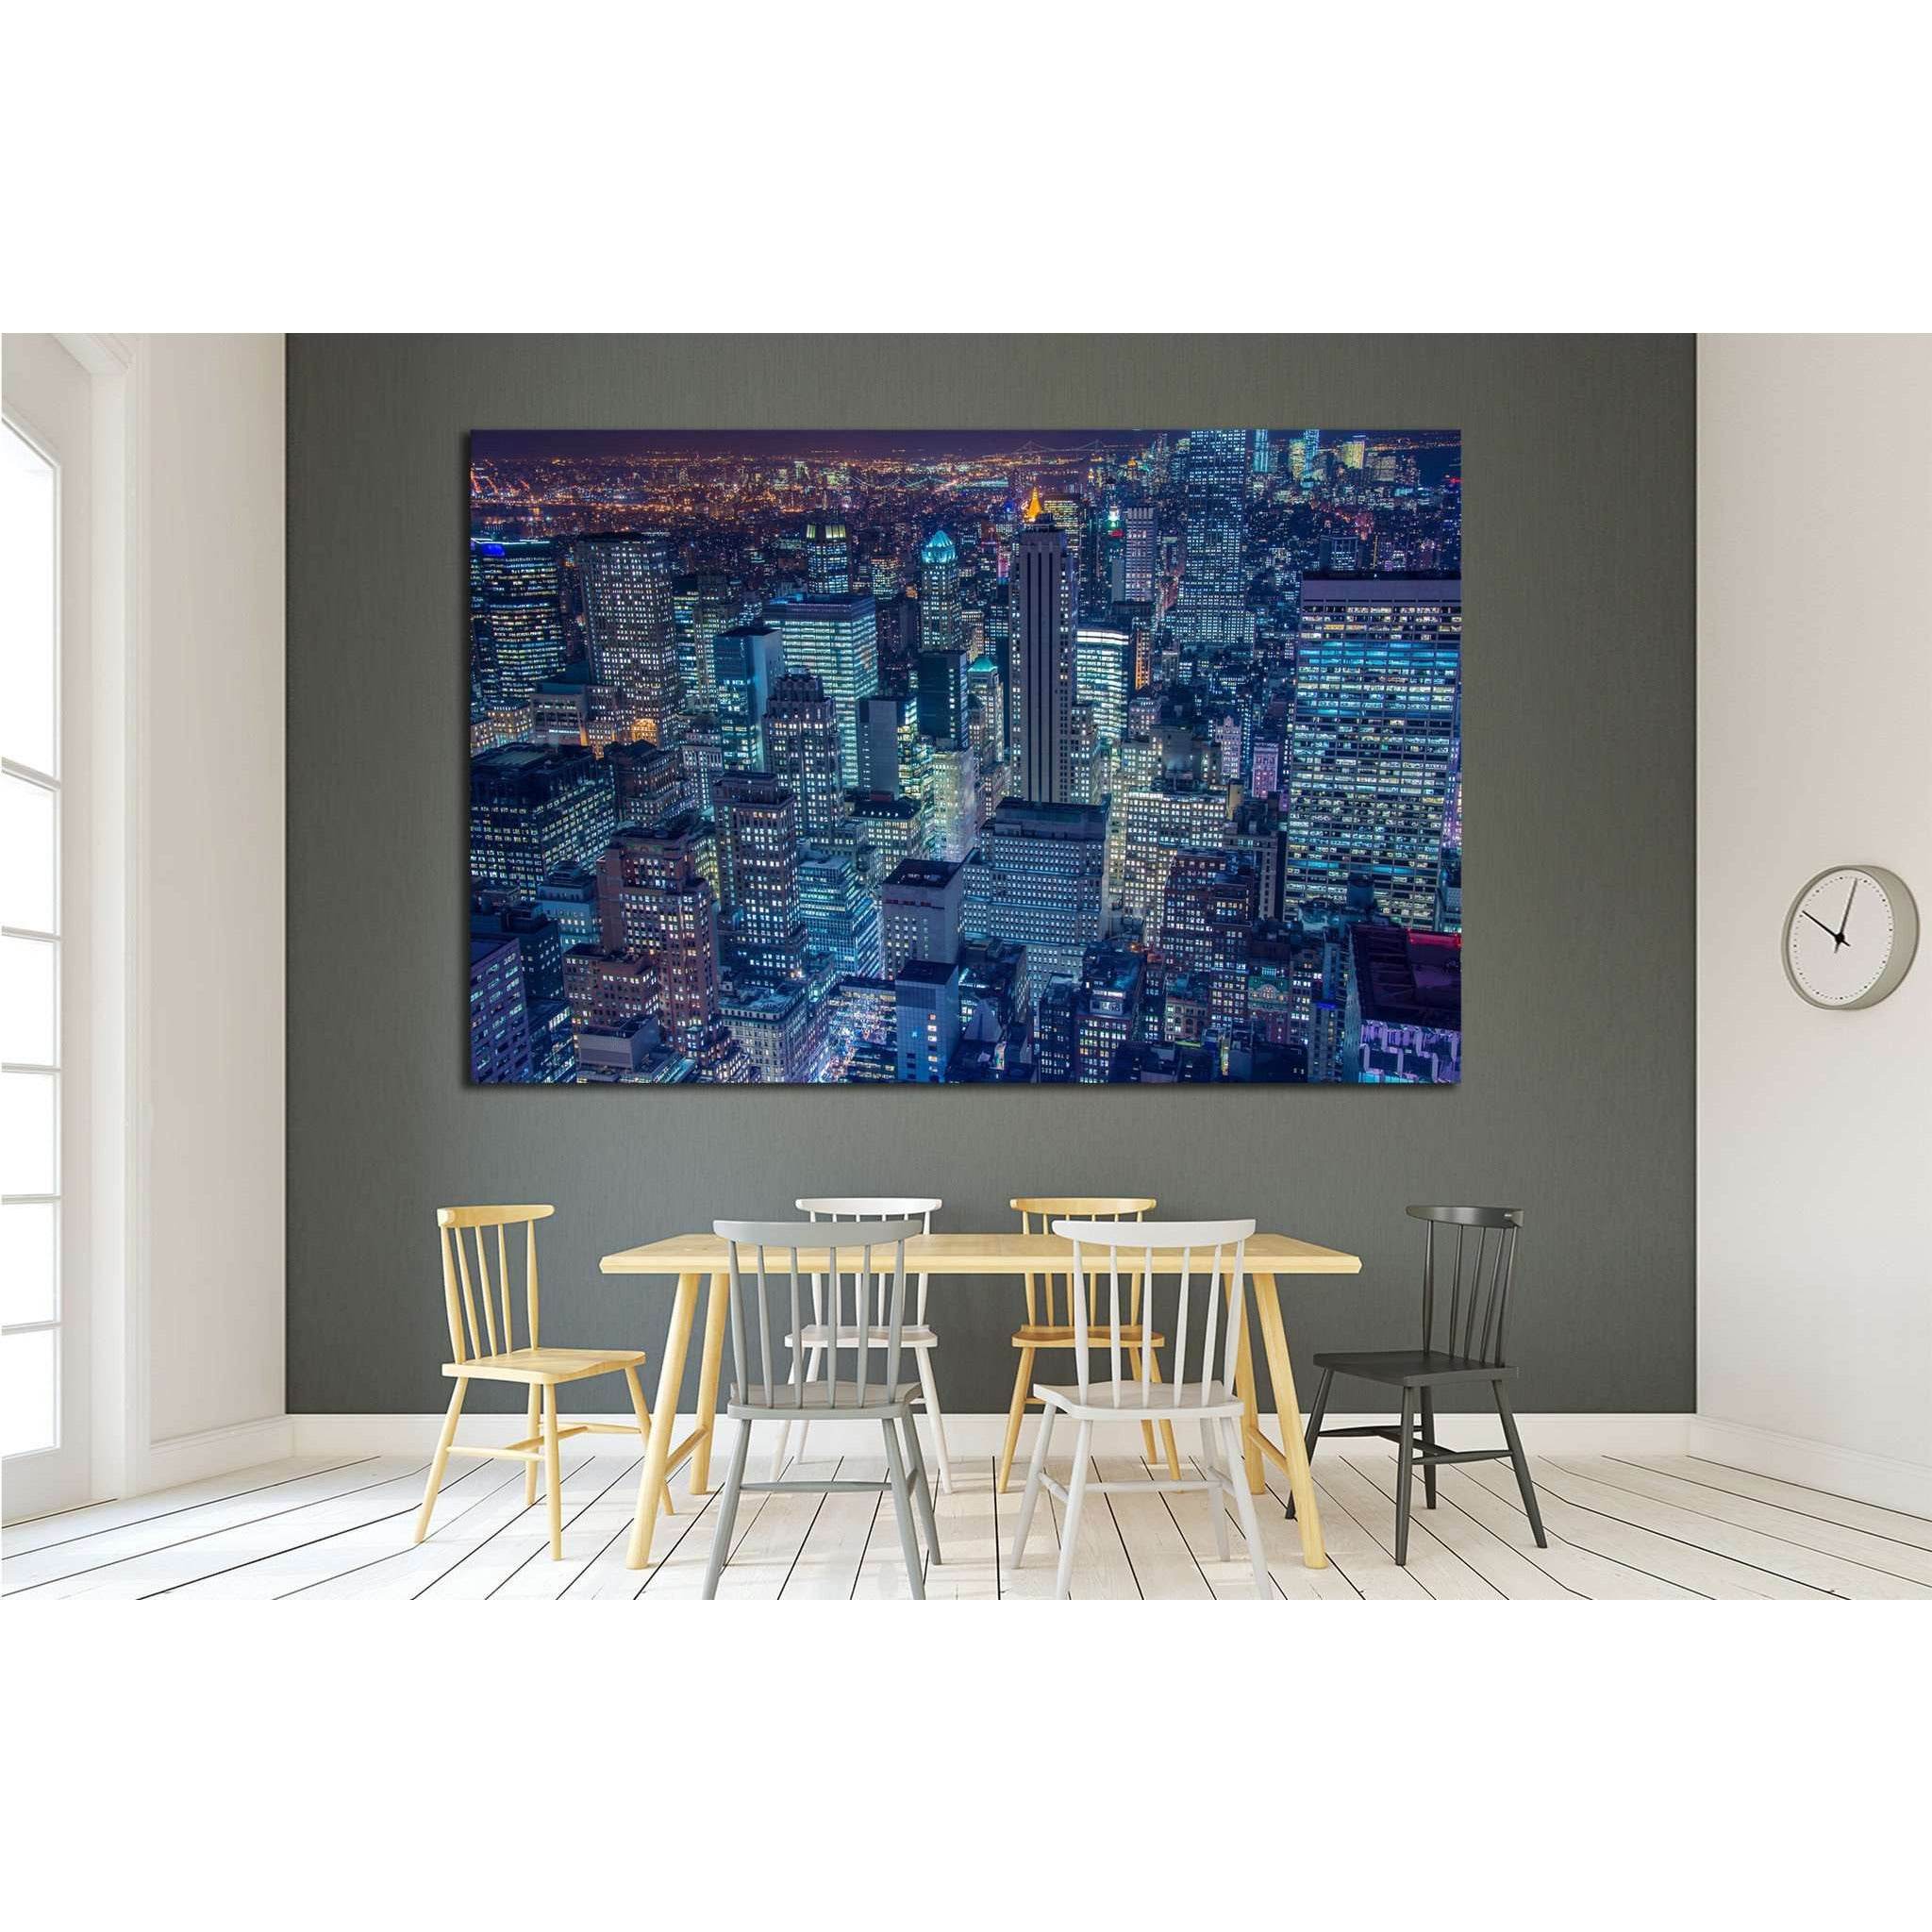 Famous skyscrapers of New York at night №1535 Ready to Hang Canvas Print